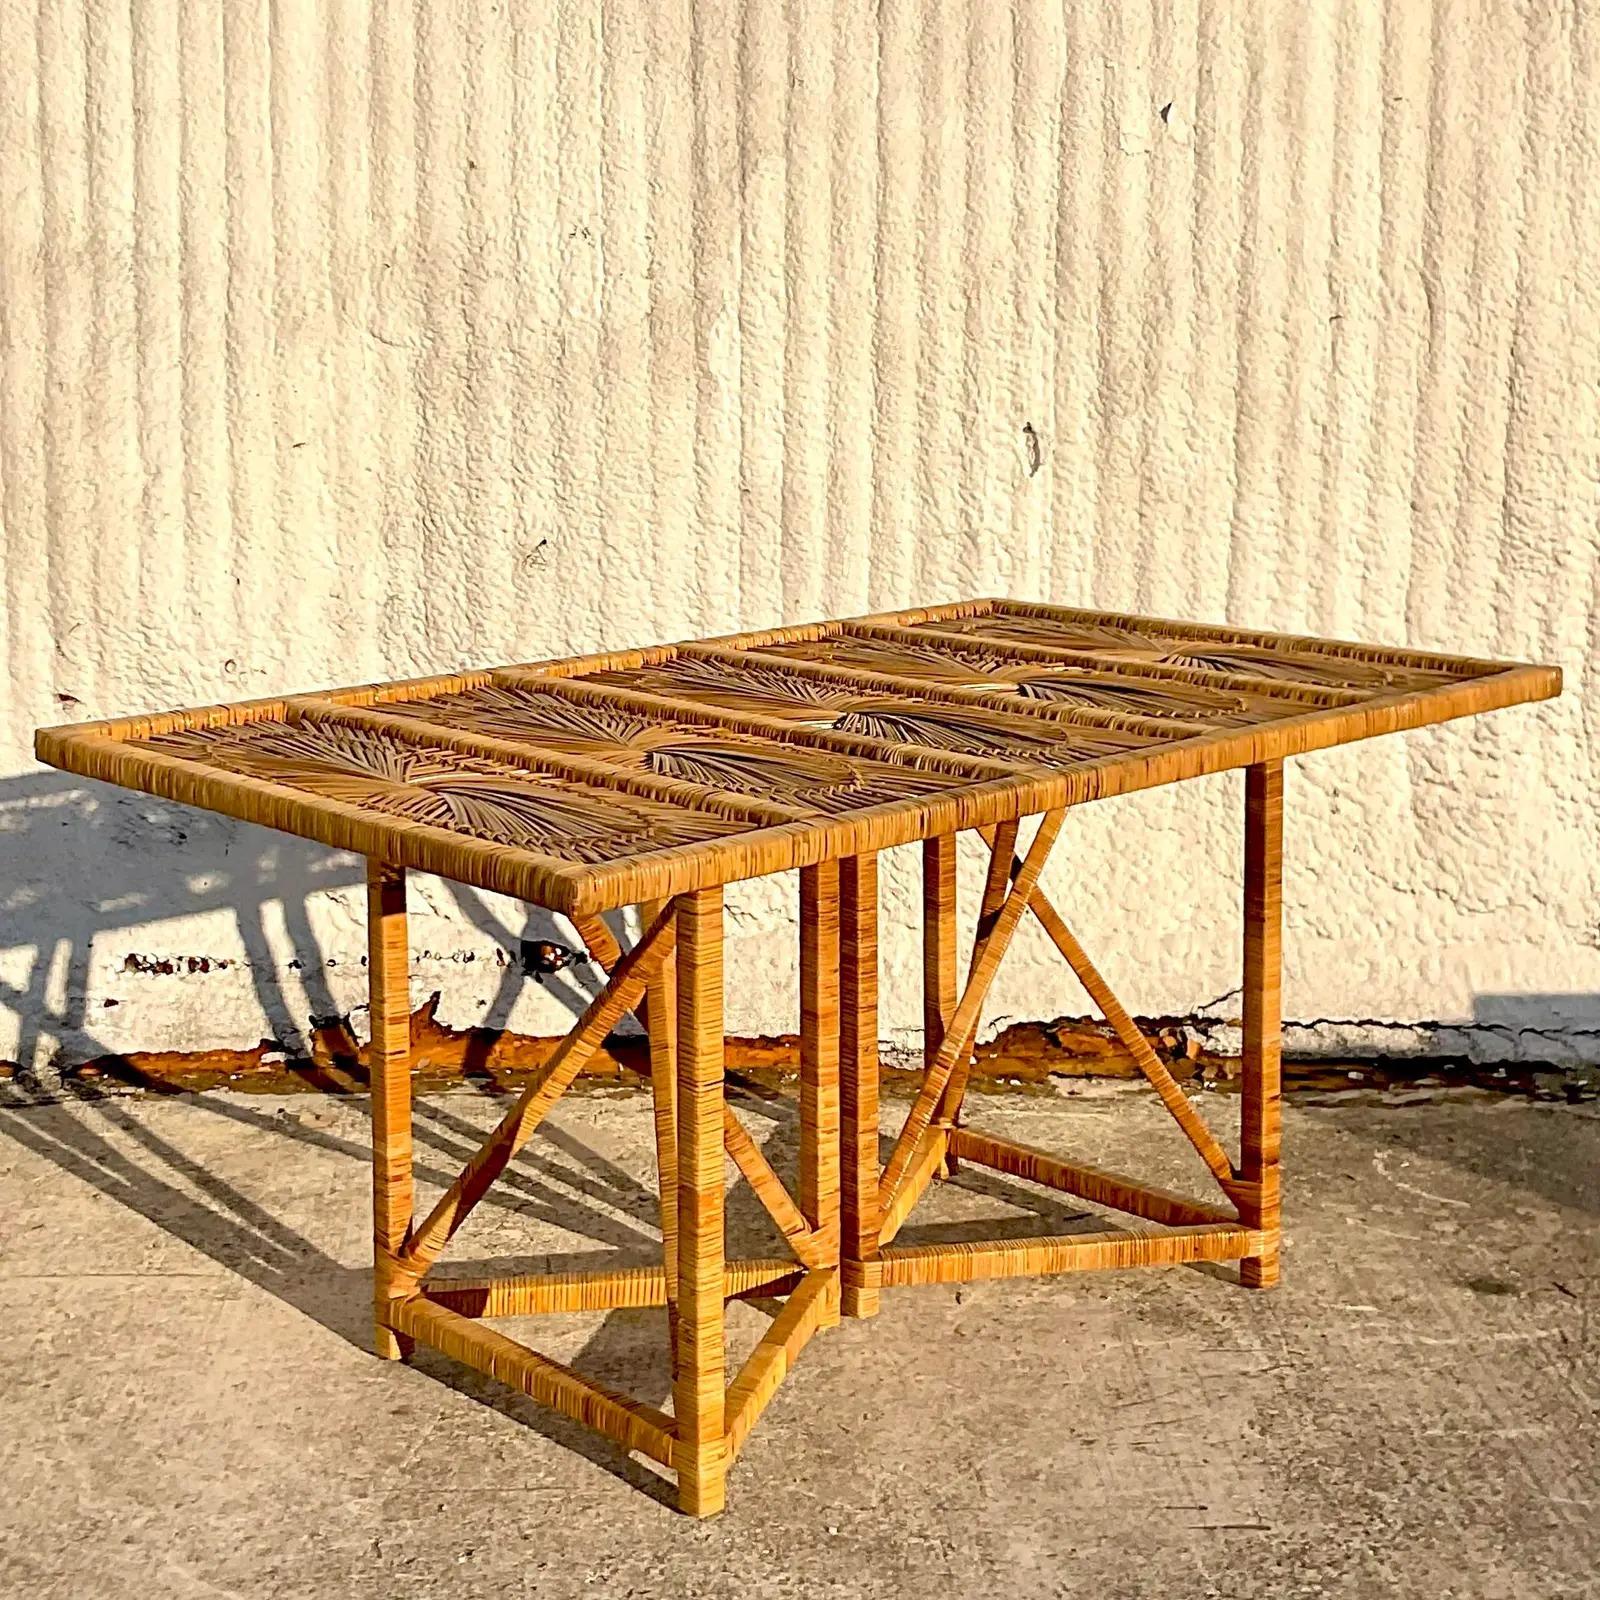 A fabulous vintage Coastal dining table. The beautiful iconic starburst design in a wrapped rattan frame. Super wrapped truss design pedestal. Acquired from a Palm Beach estate.